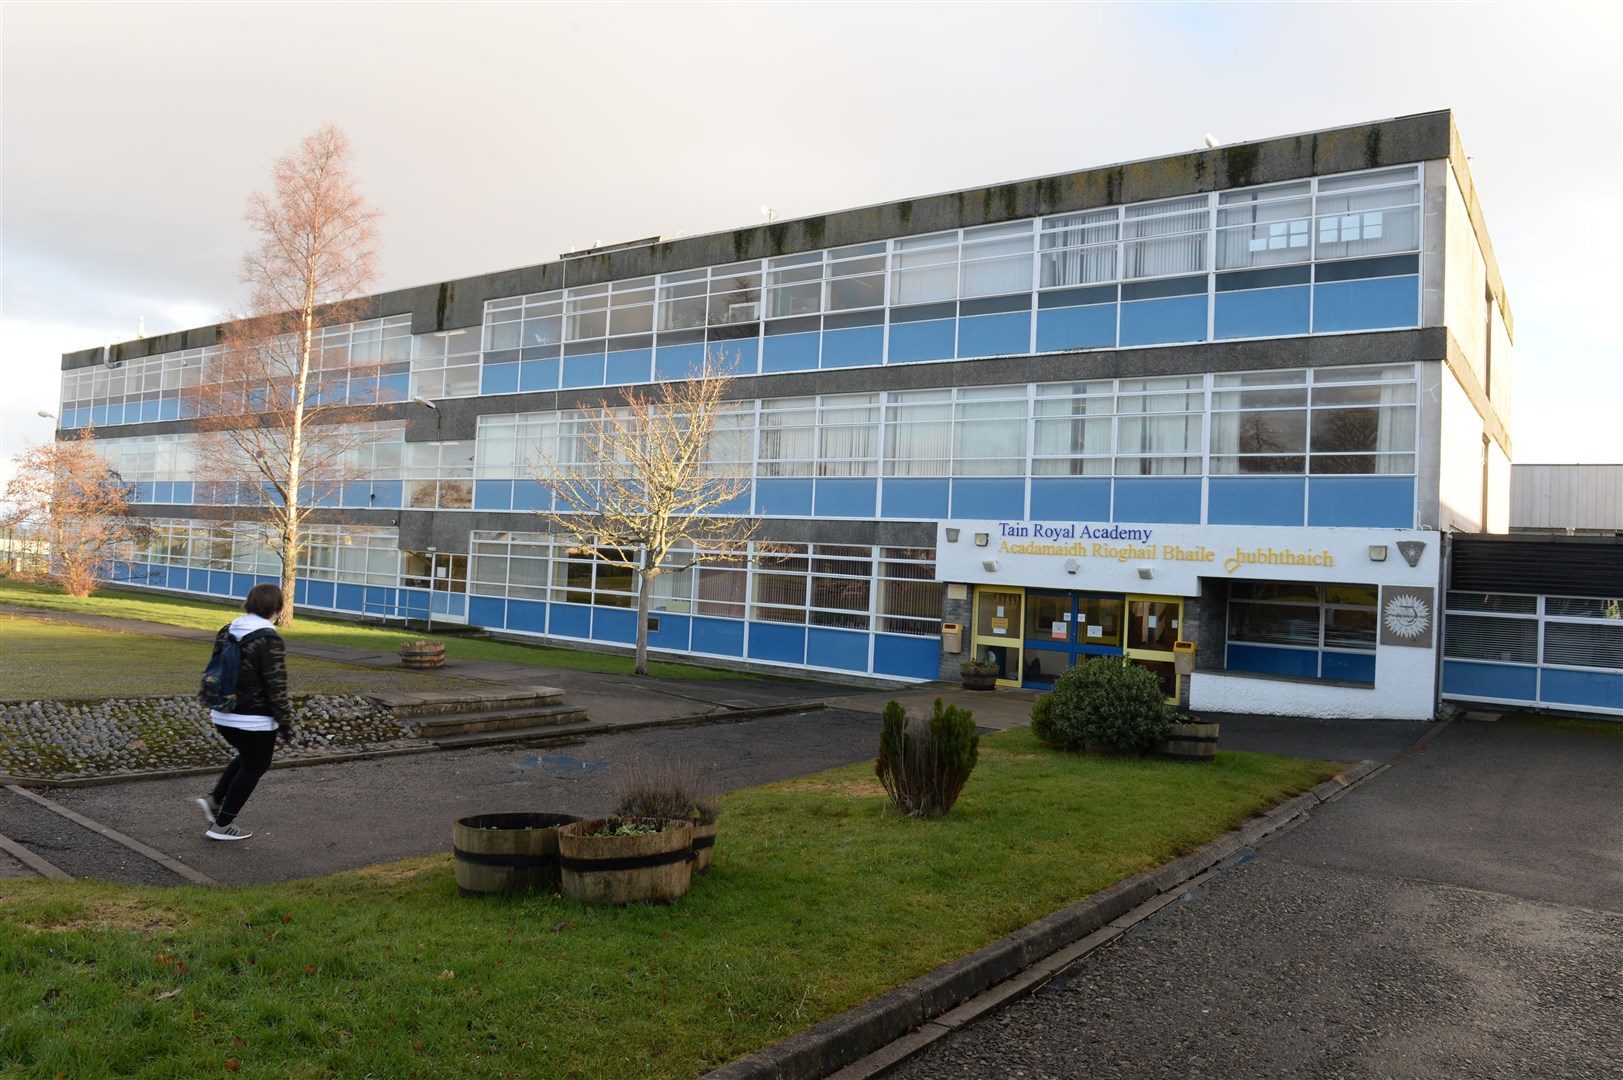 Tain Royal Academy, along with several primary schools, will be replaced by a new campus set to be built on a site at Craighill Primary.